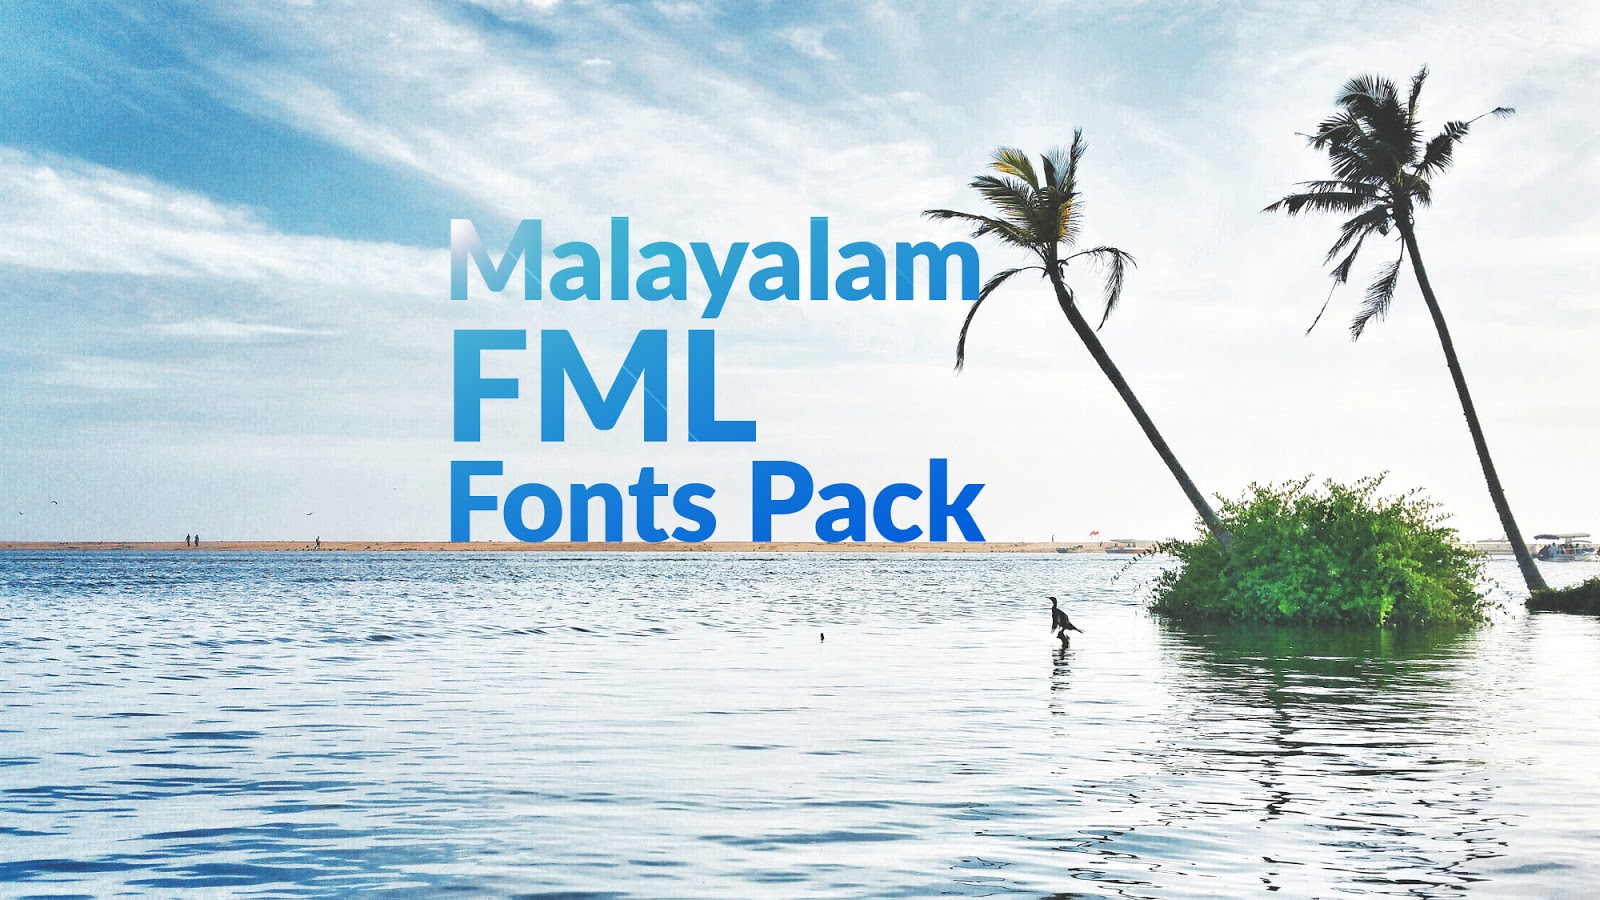 Download Free Download New Malayalam FML Fonts Pack 2021